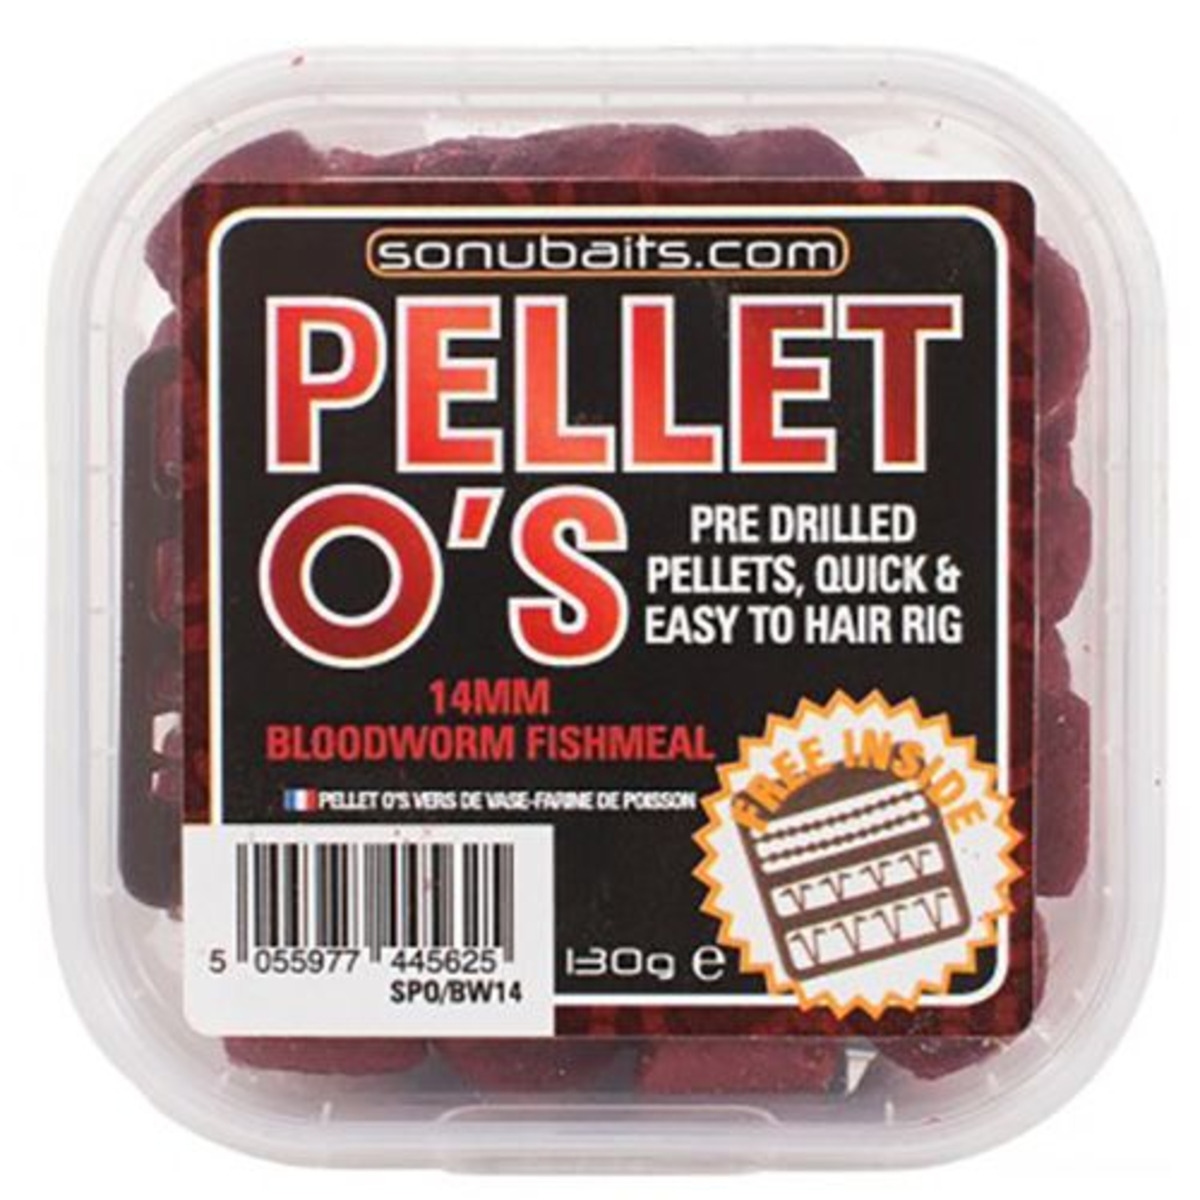 Sonubaits Pellet O´s - Bloodworm Fishmeal - 14 mm - 130 g